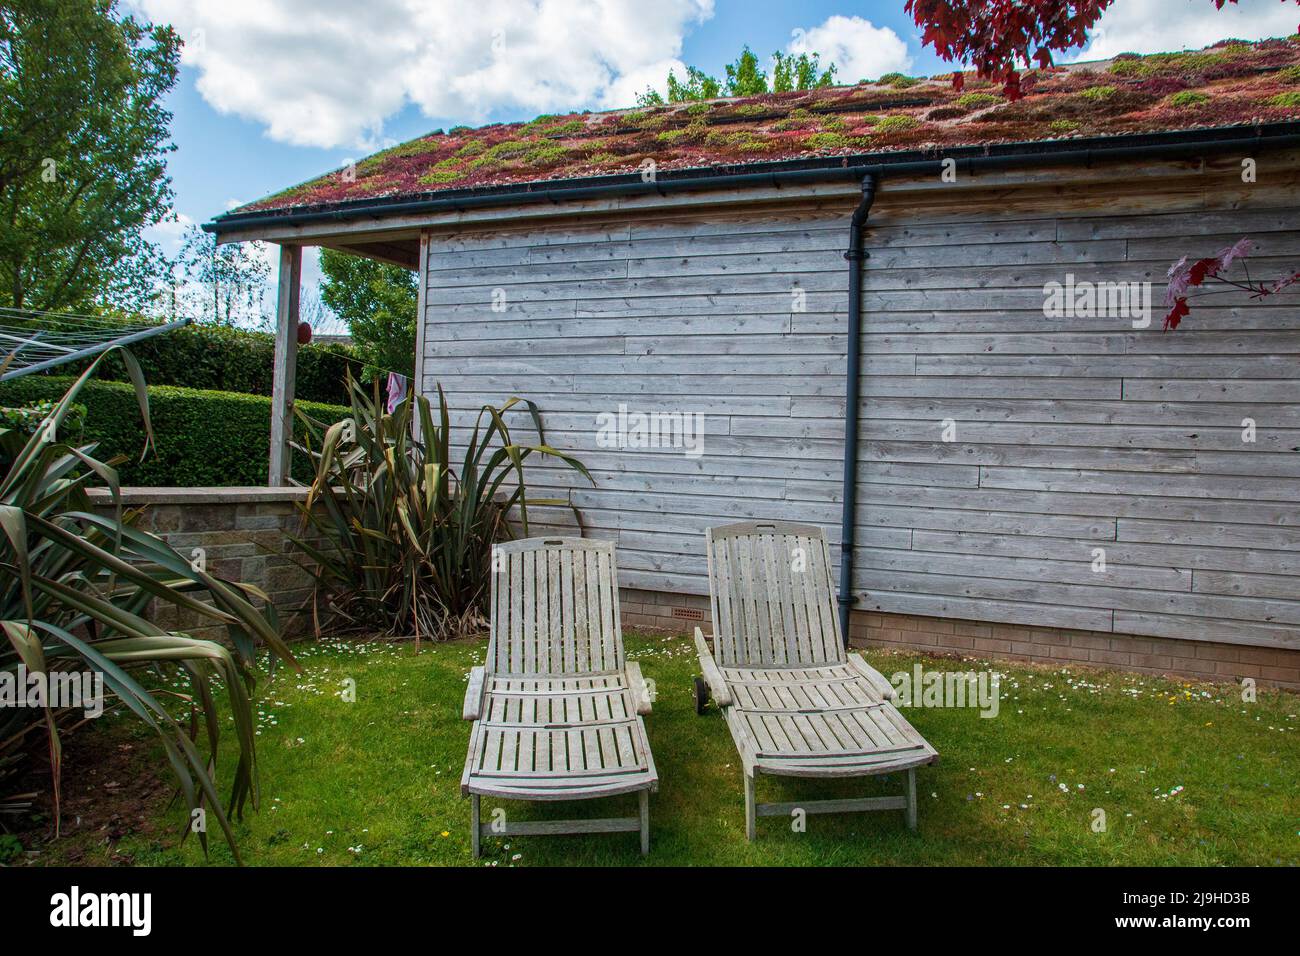 A close up view of two sun chairs in the garden near a pool on a warm summers day Stock Photo